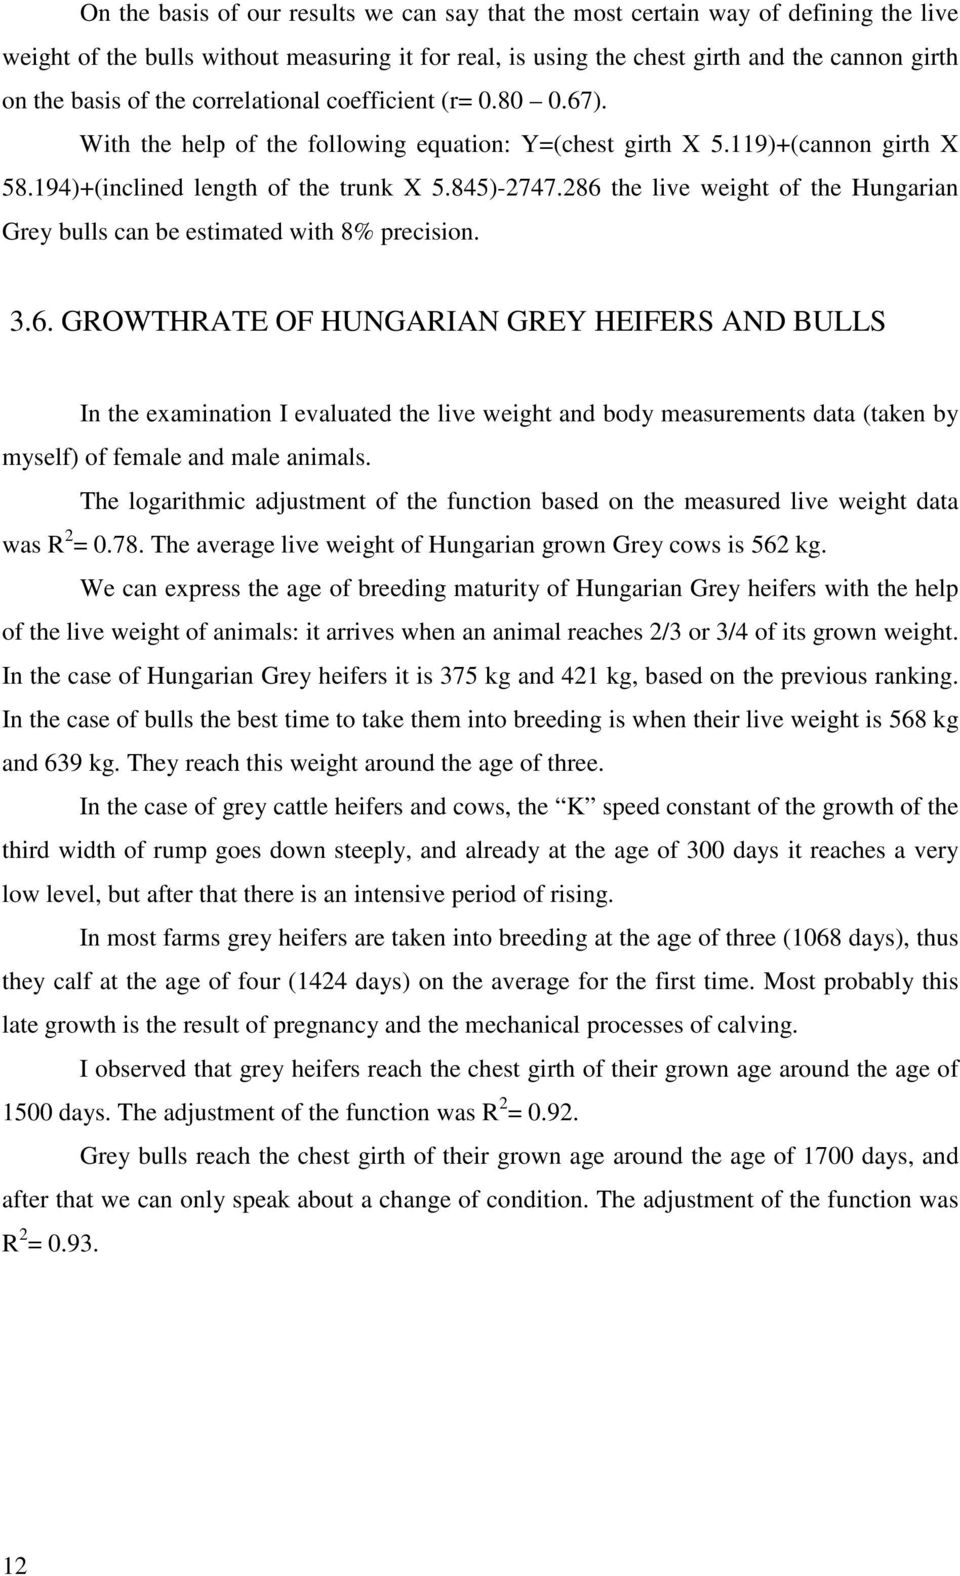 286 the live weight of the Hungarian Grey bulls can be estimated with 8% precision. 3.6. GROWTHRATE OF HUNGARIAN GREY HEIFERS AND BULLS In the examination I evaluated the live weight and body measurements data (taken by myself) of female and male animals.